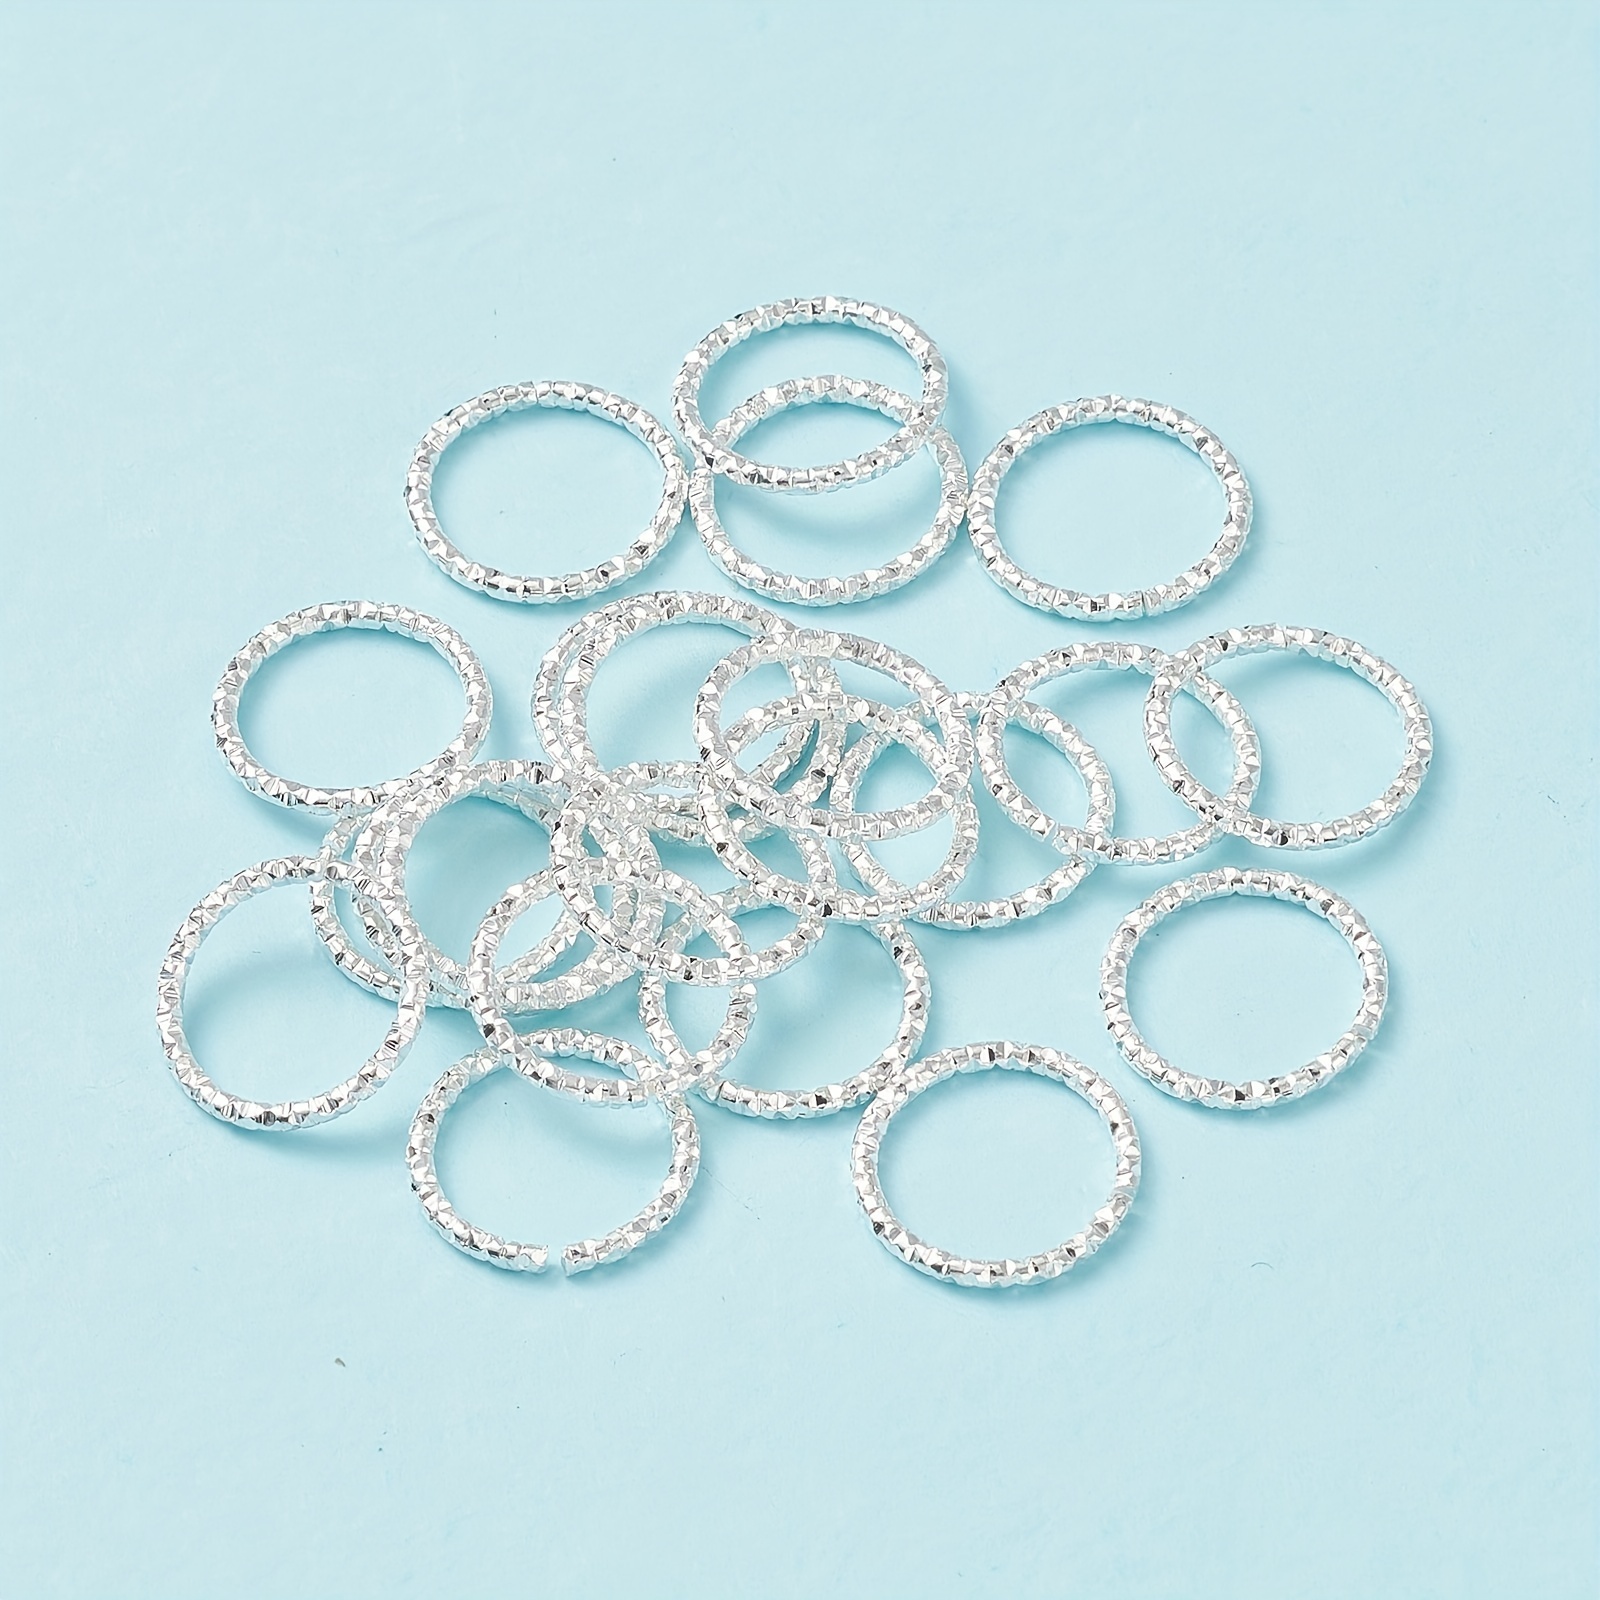 50PCS 14k Gold Filled Twisted Open Jump Rings for Jewelry Making